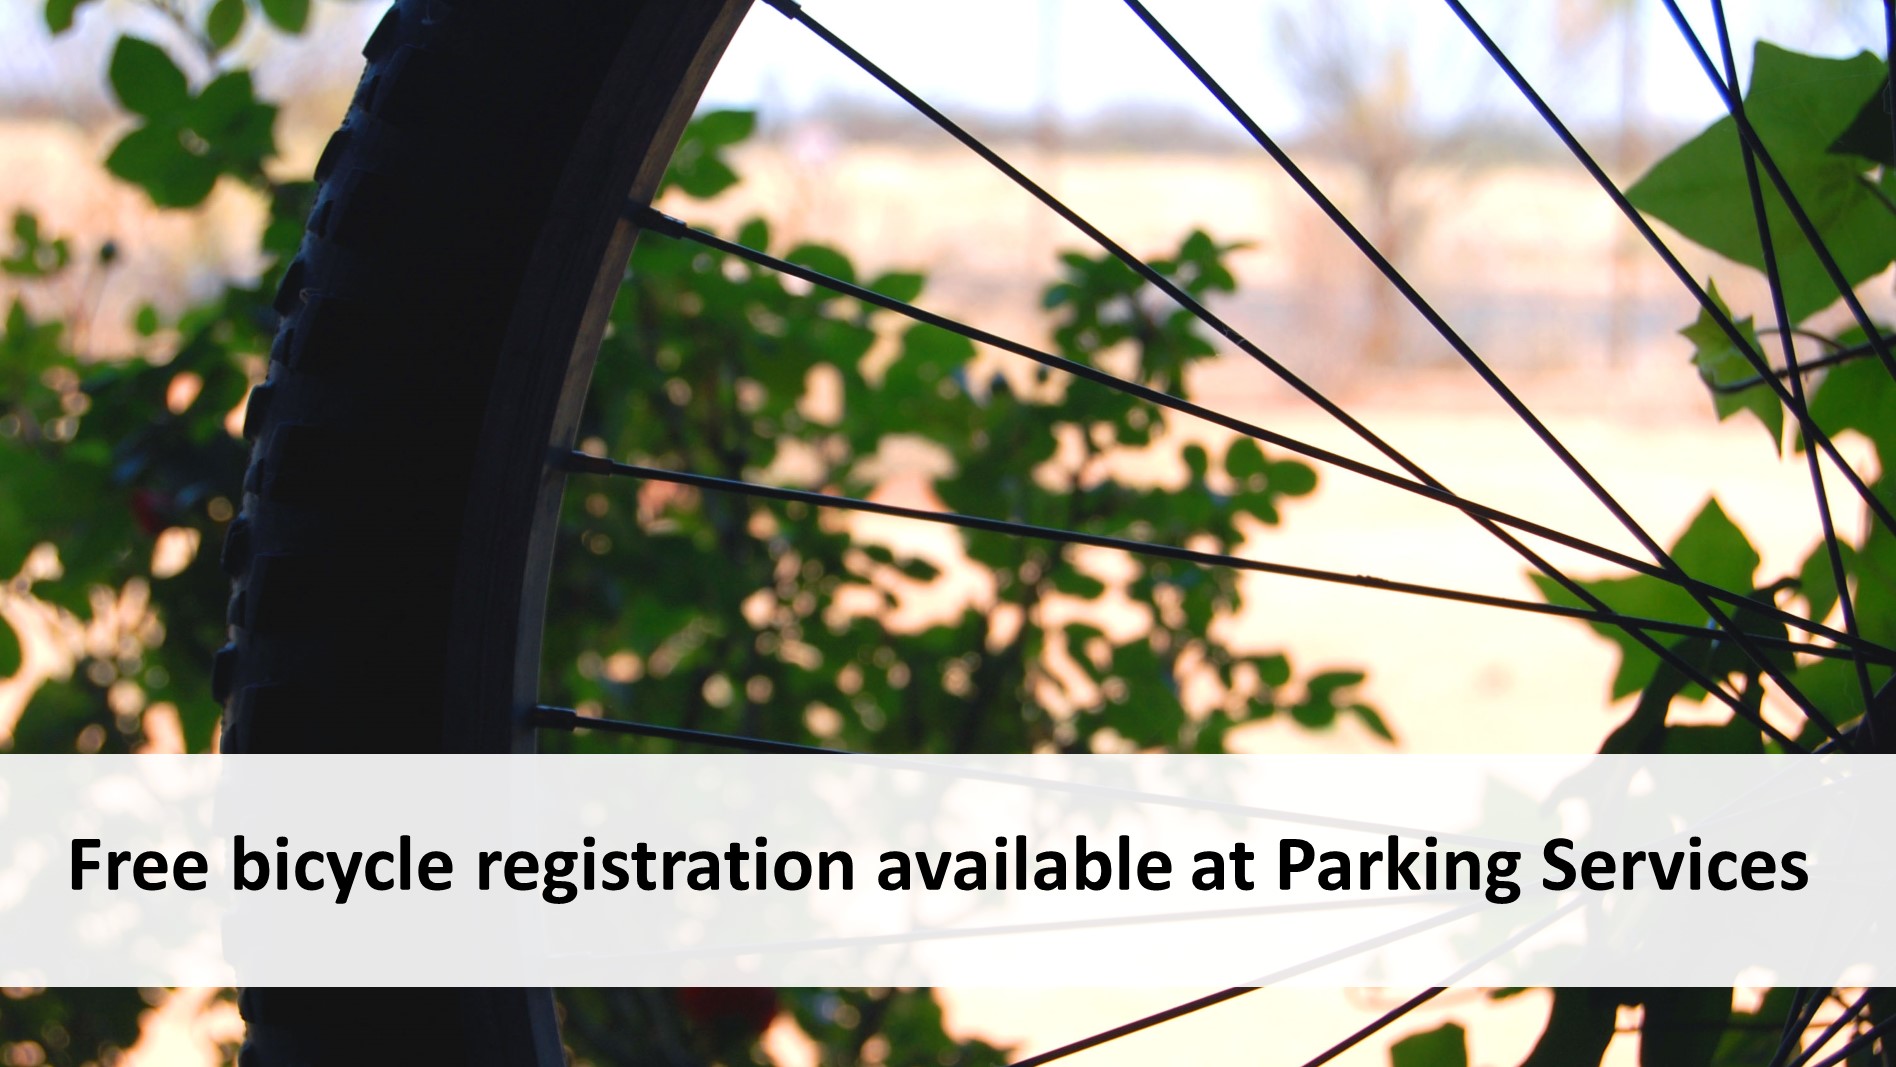 Free bicycle registration at Parking Services